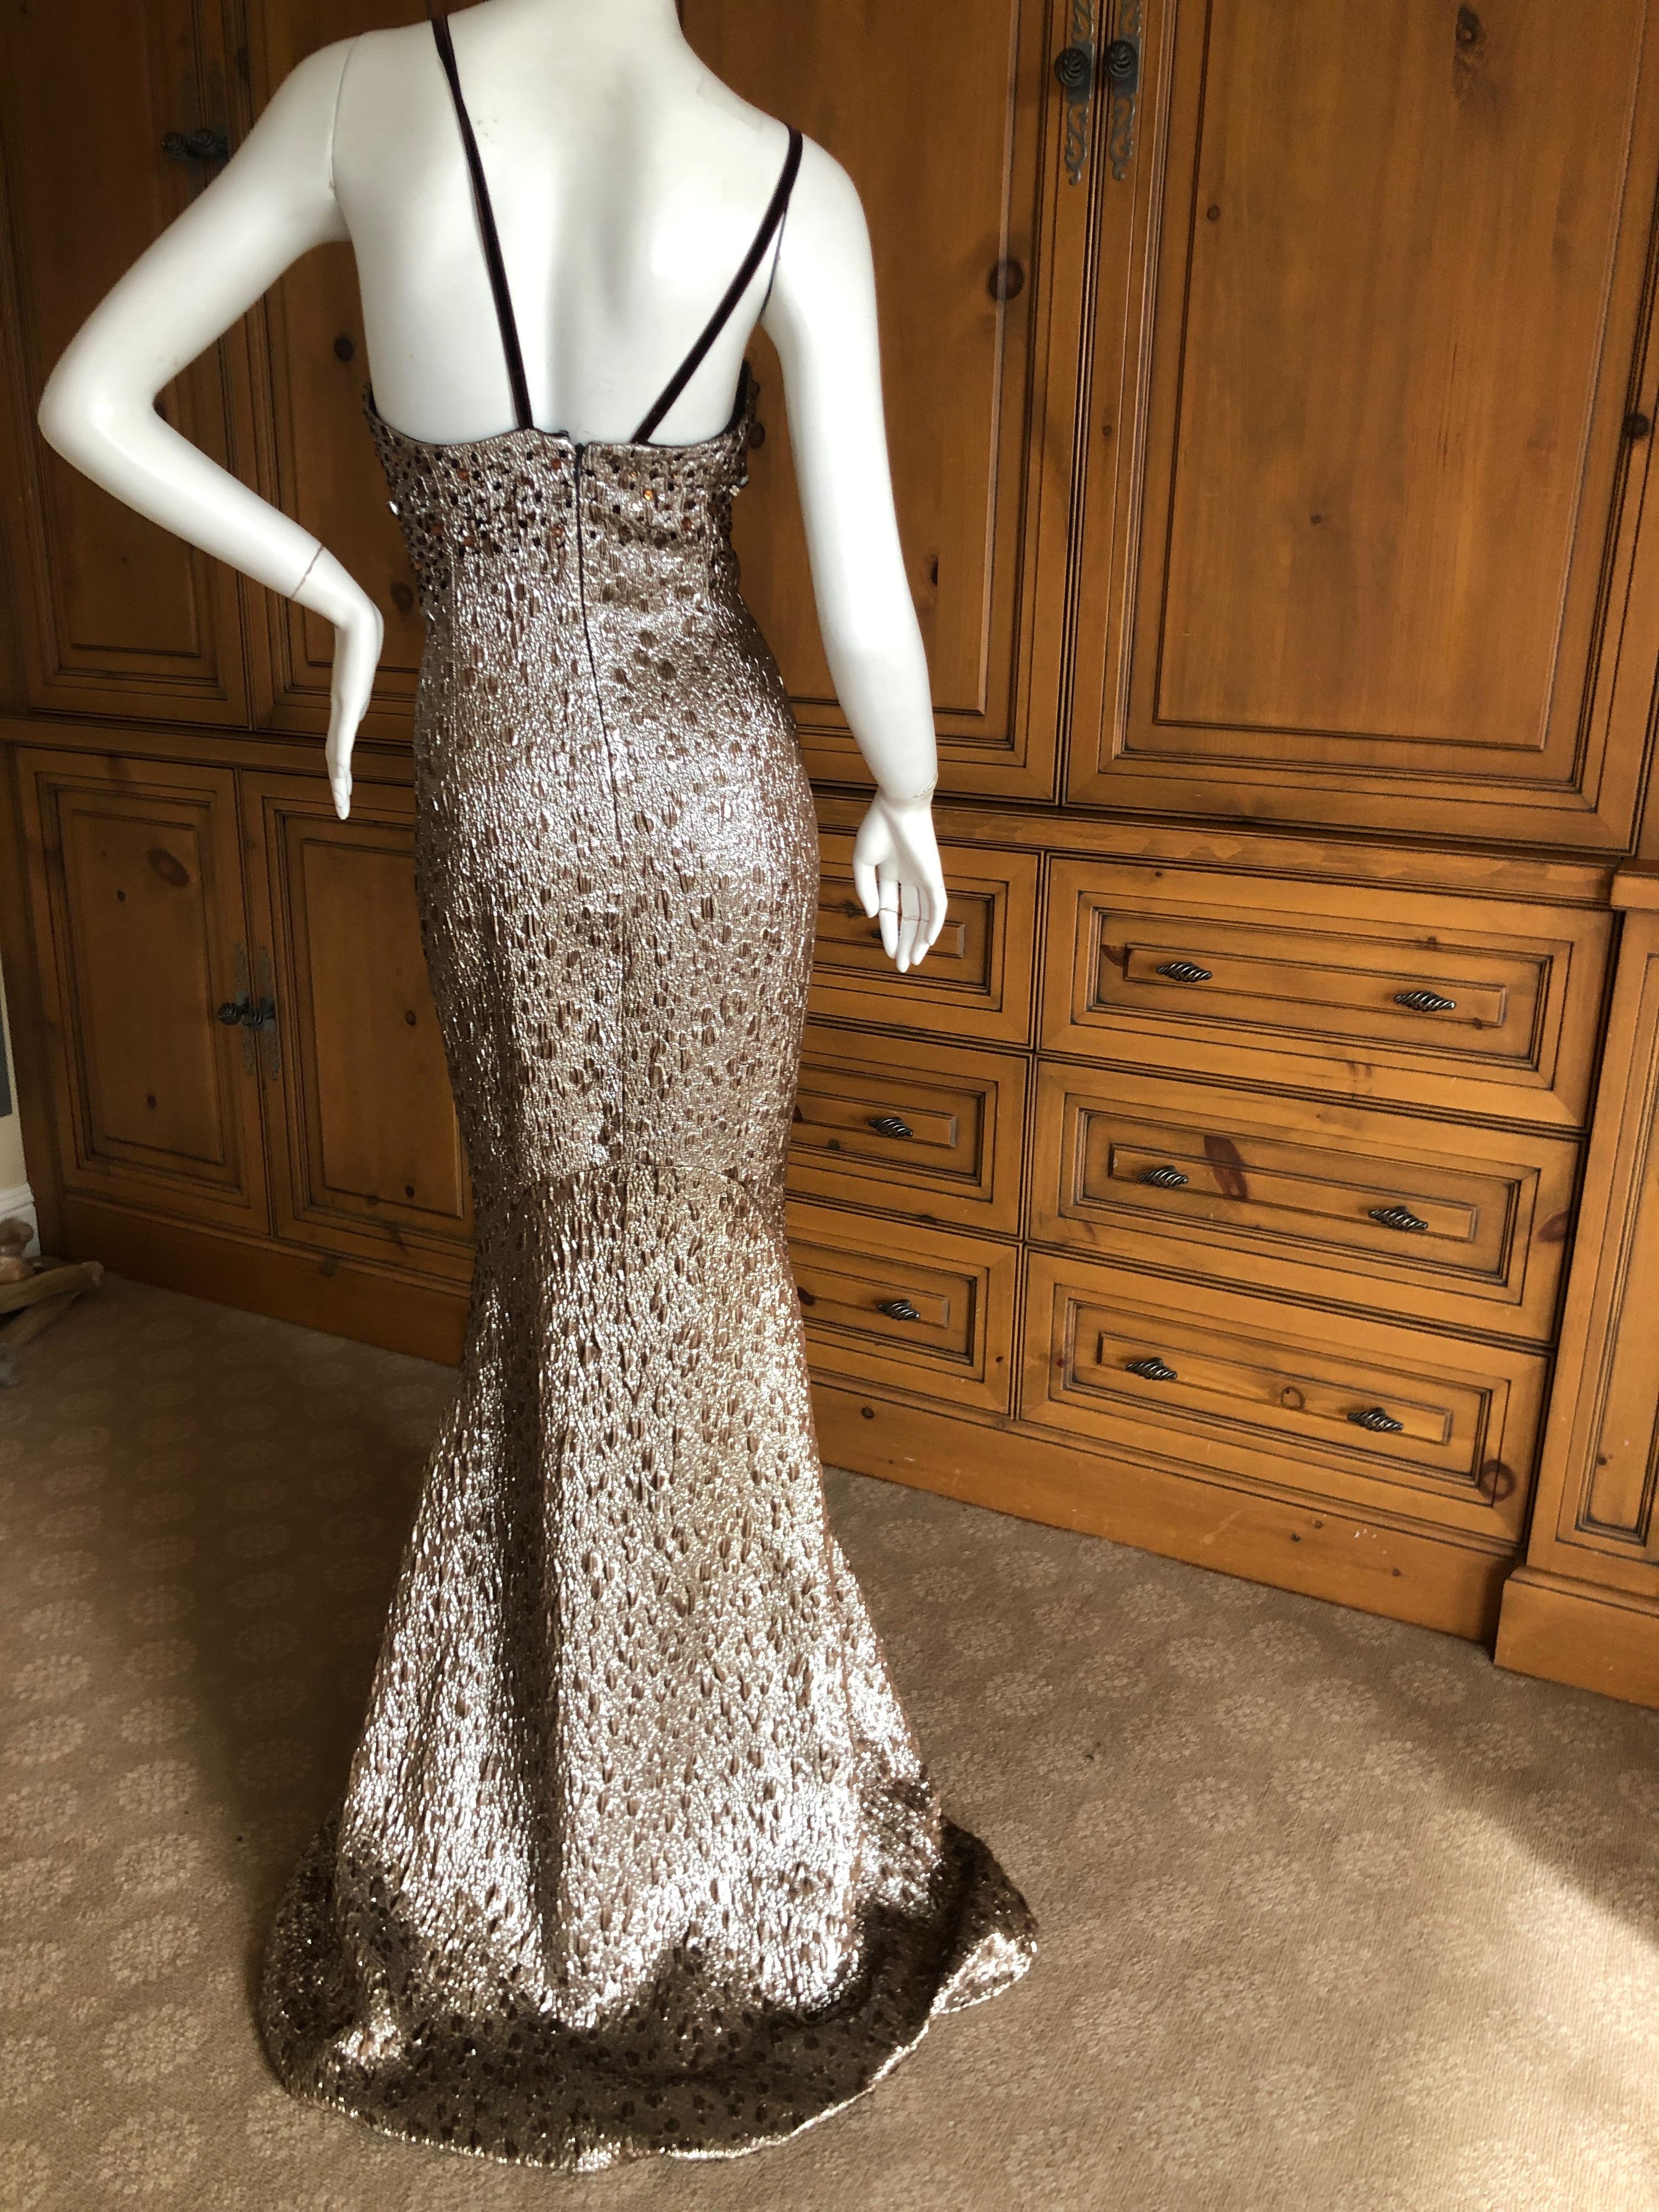 Carolina Herrera Gold Embellished Evening Gown in Hard to Find Size 14
SO pretty, please use zoom feature to see details.
MArked size 14 but it runs large, please see measurements;
Bust 42